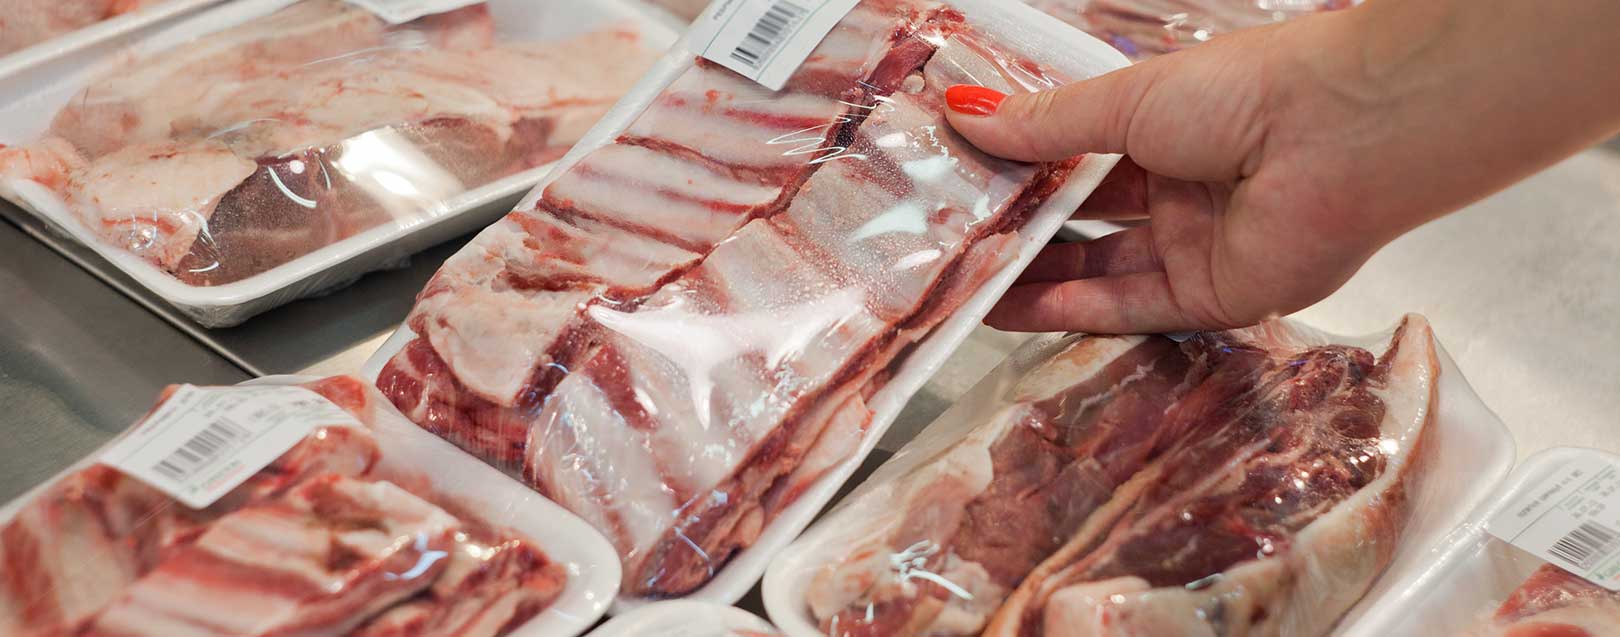 China bans import of meat from 6 Australian companies